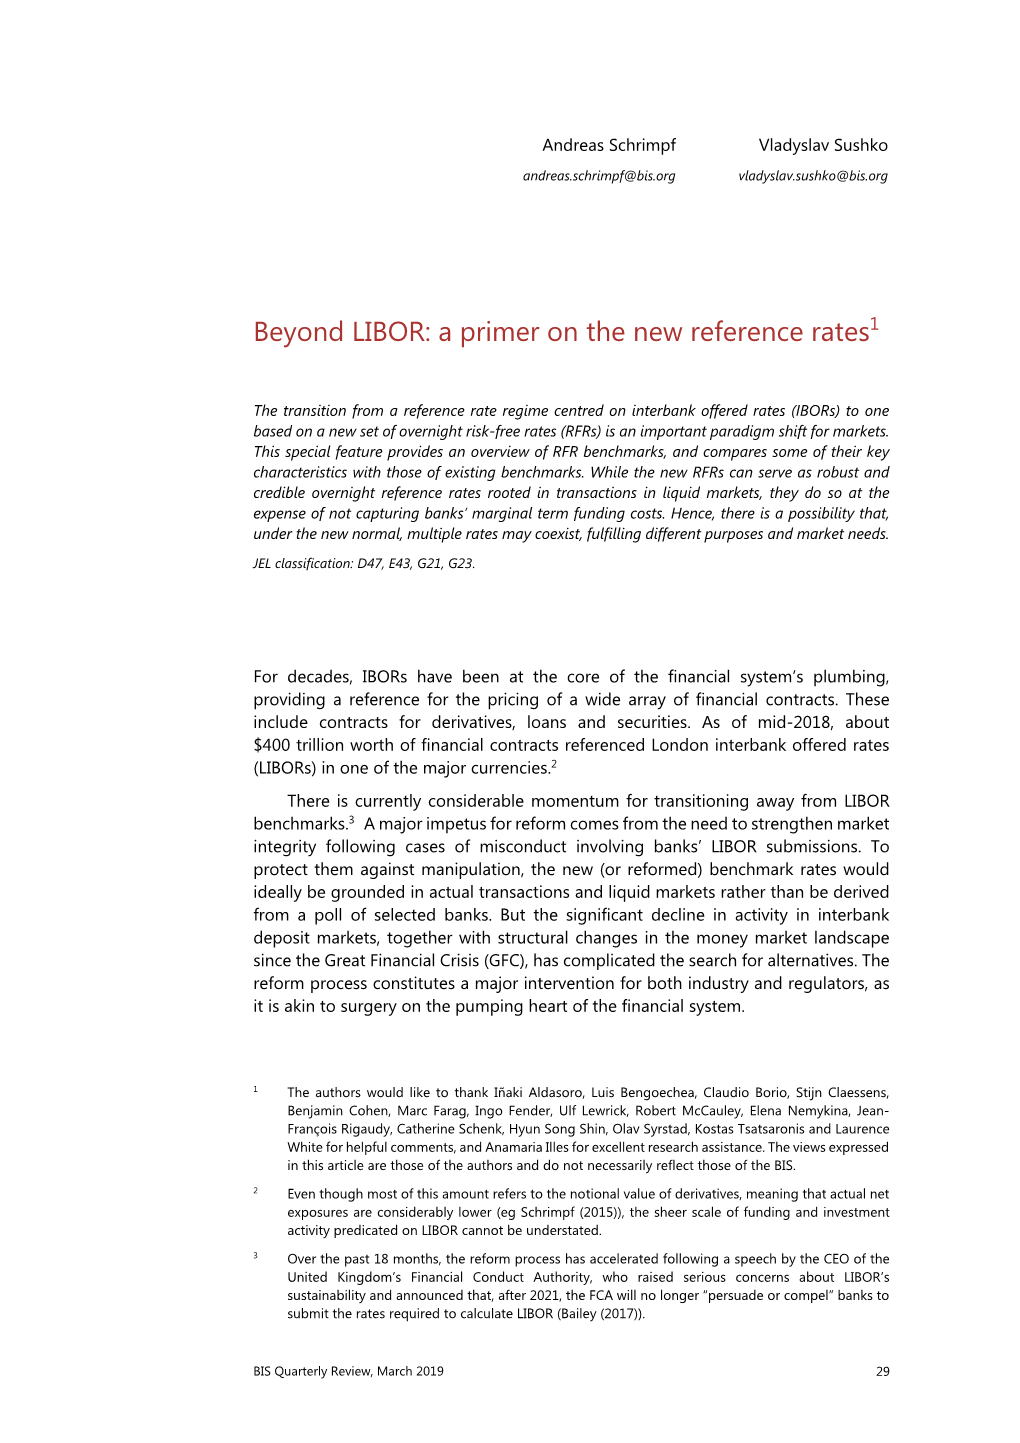 Beyond LIBOR: a Primer on the New Reference Rates1